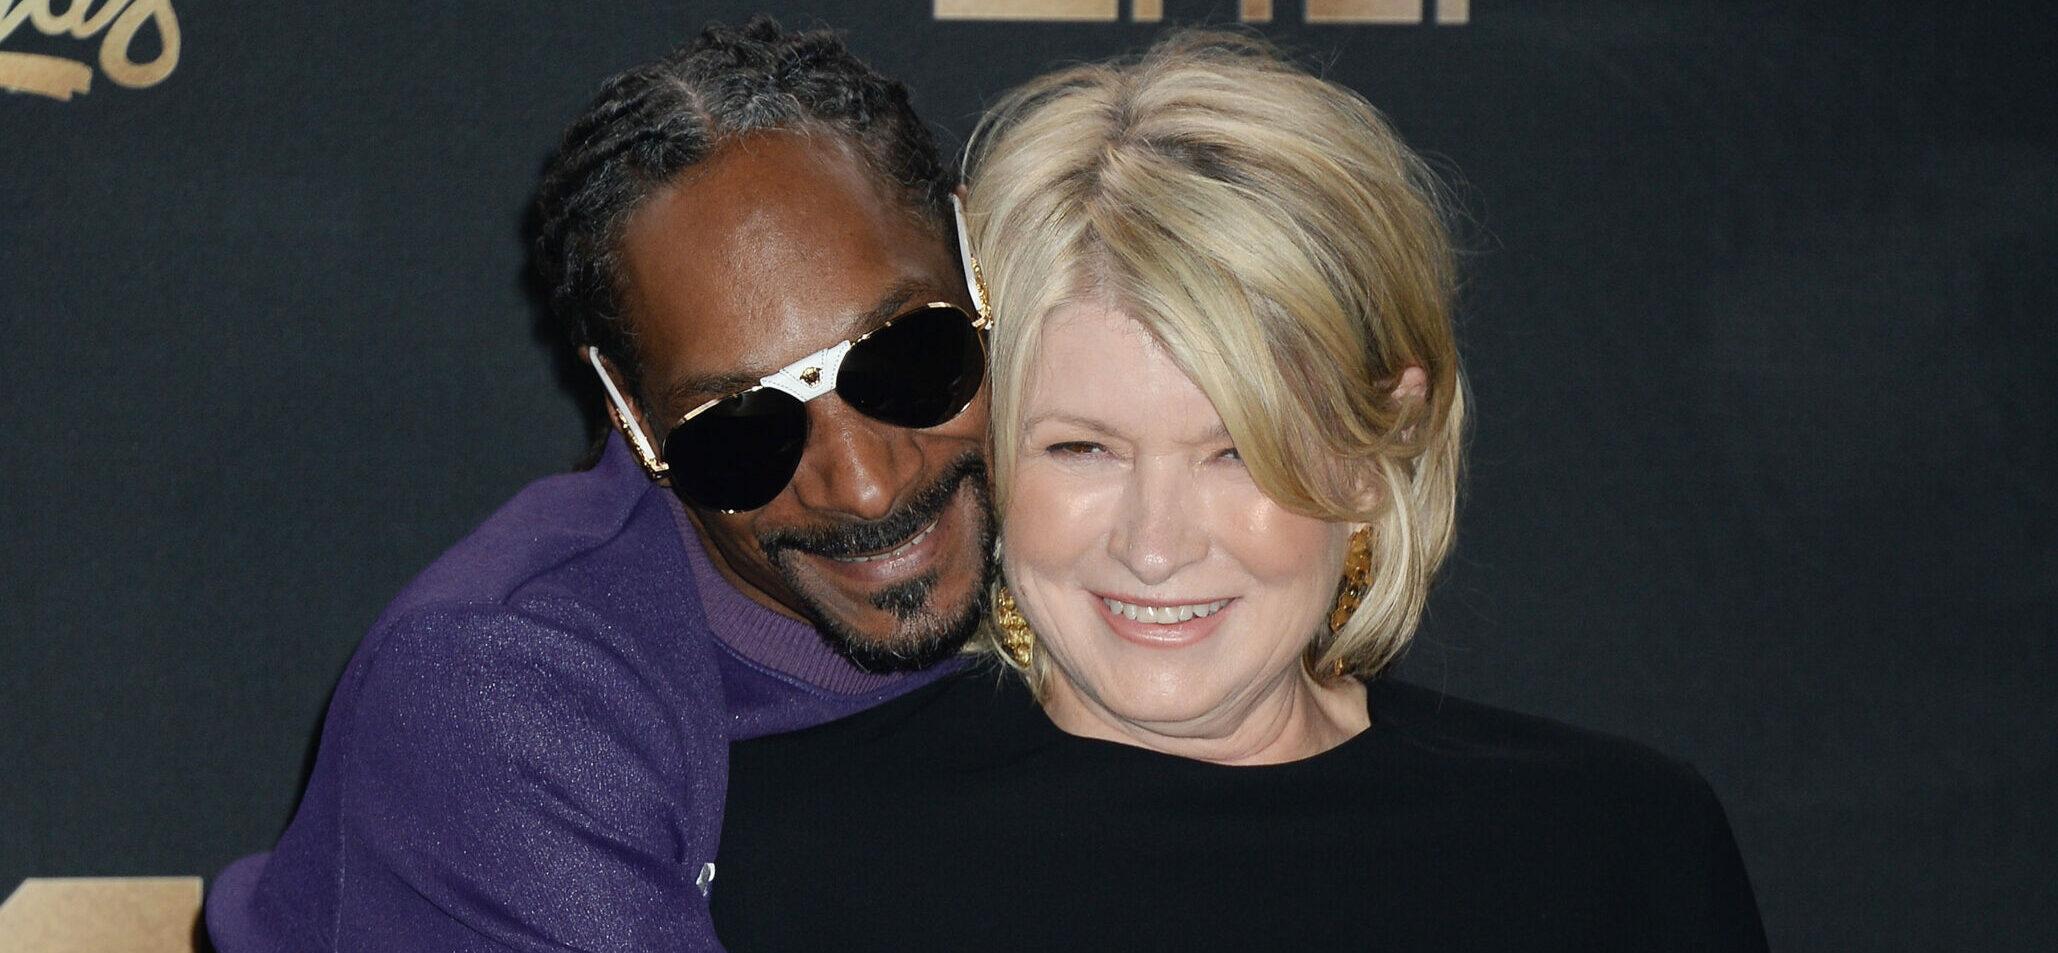 Celebrities in the press room at the 2017 MTV Movie and TV Awards at the Shrine Auditorium in Los Angeles, California. 07 May 2017 Pictured: Snoop Dogg, Martha Stewart.